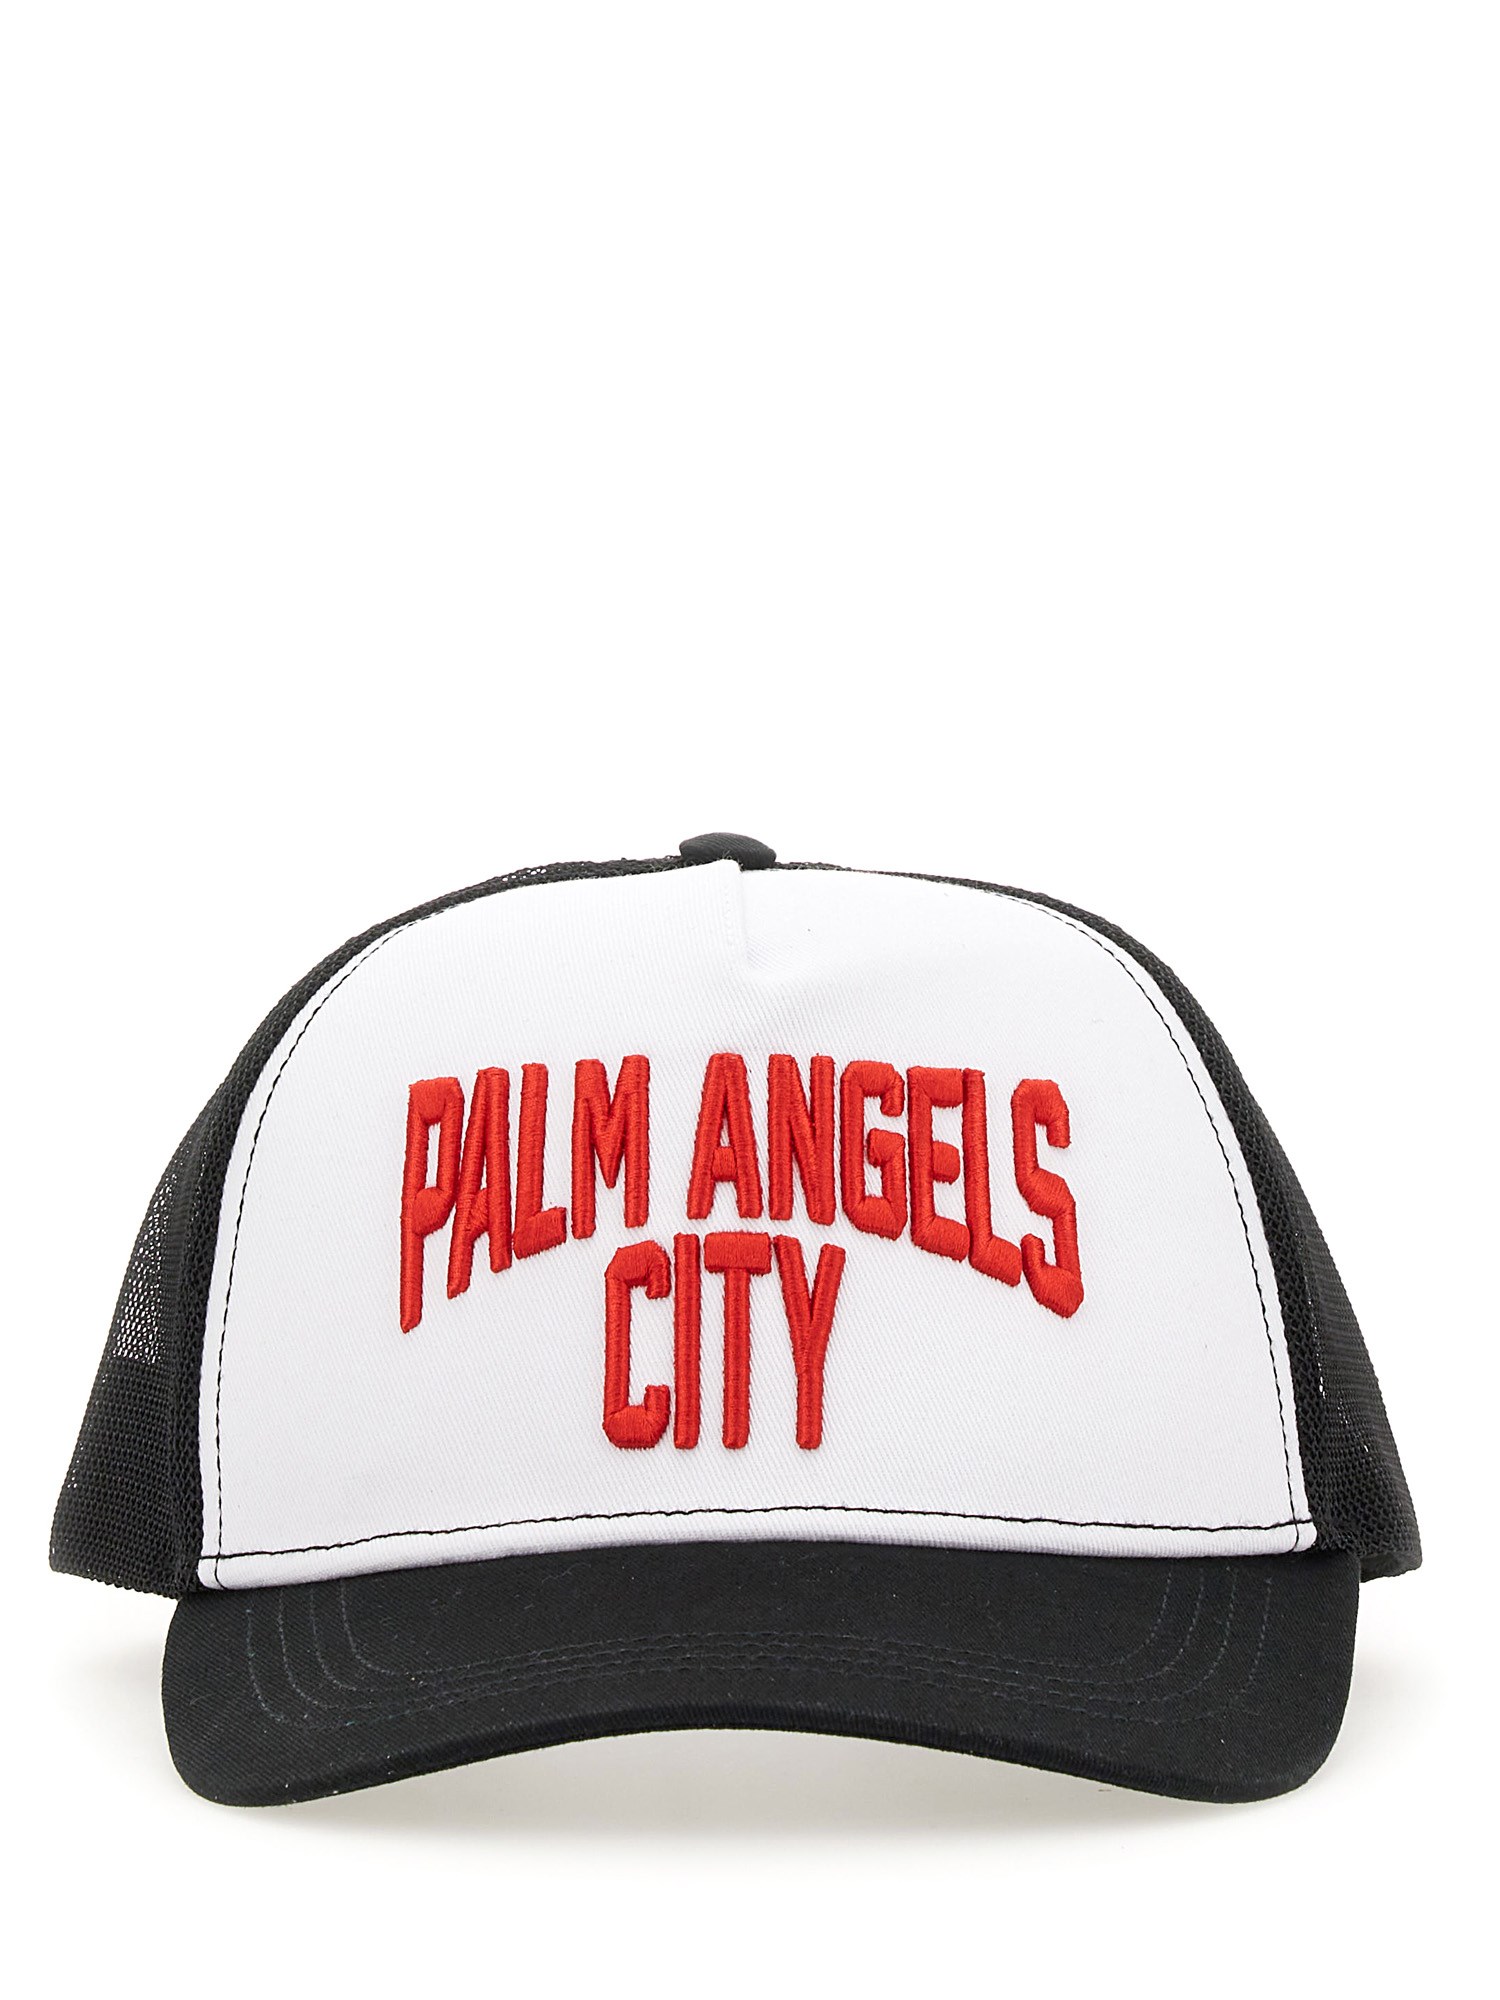 palm angels baseball hat with logo